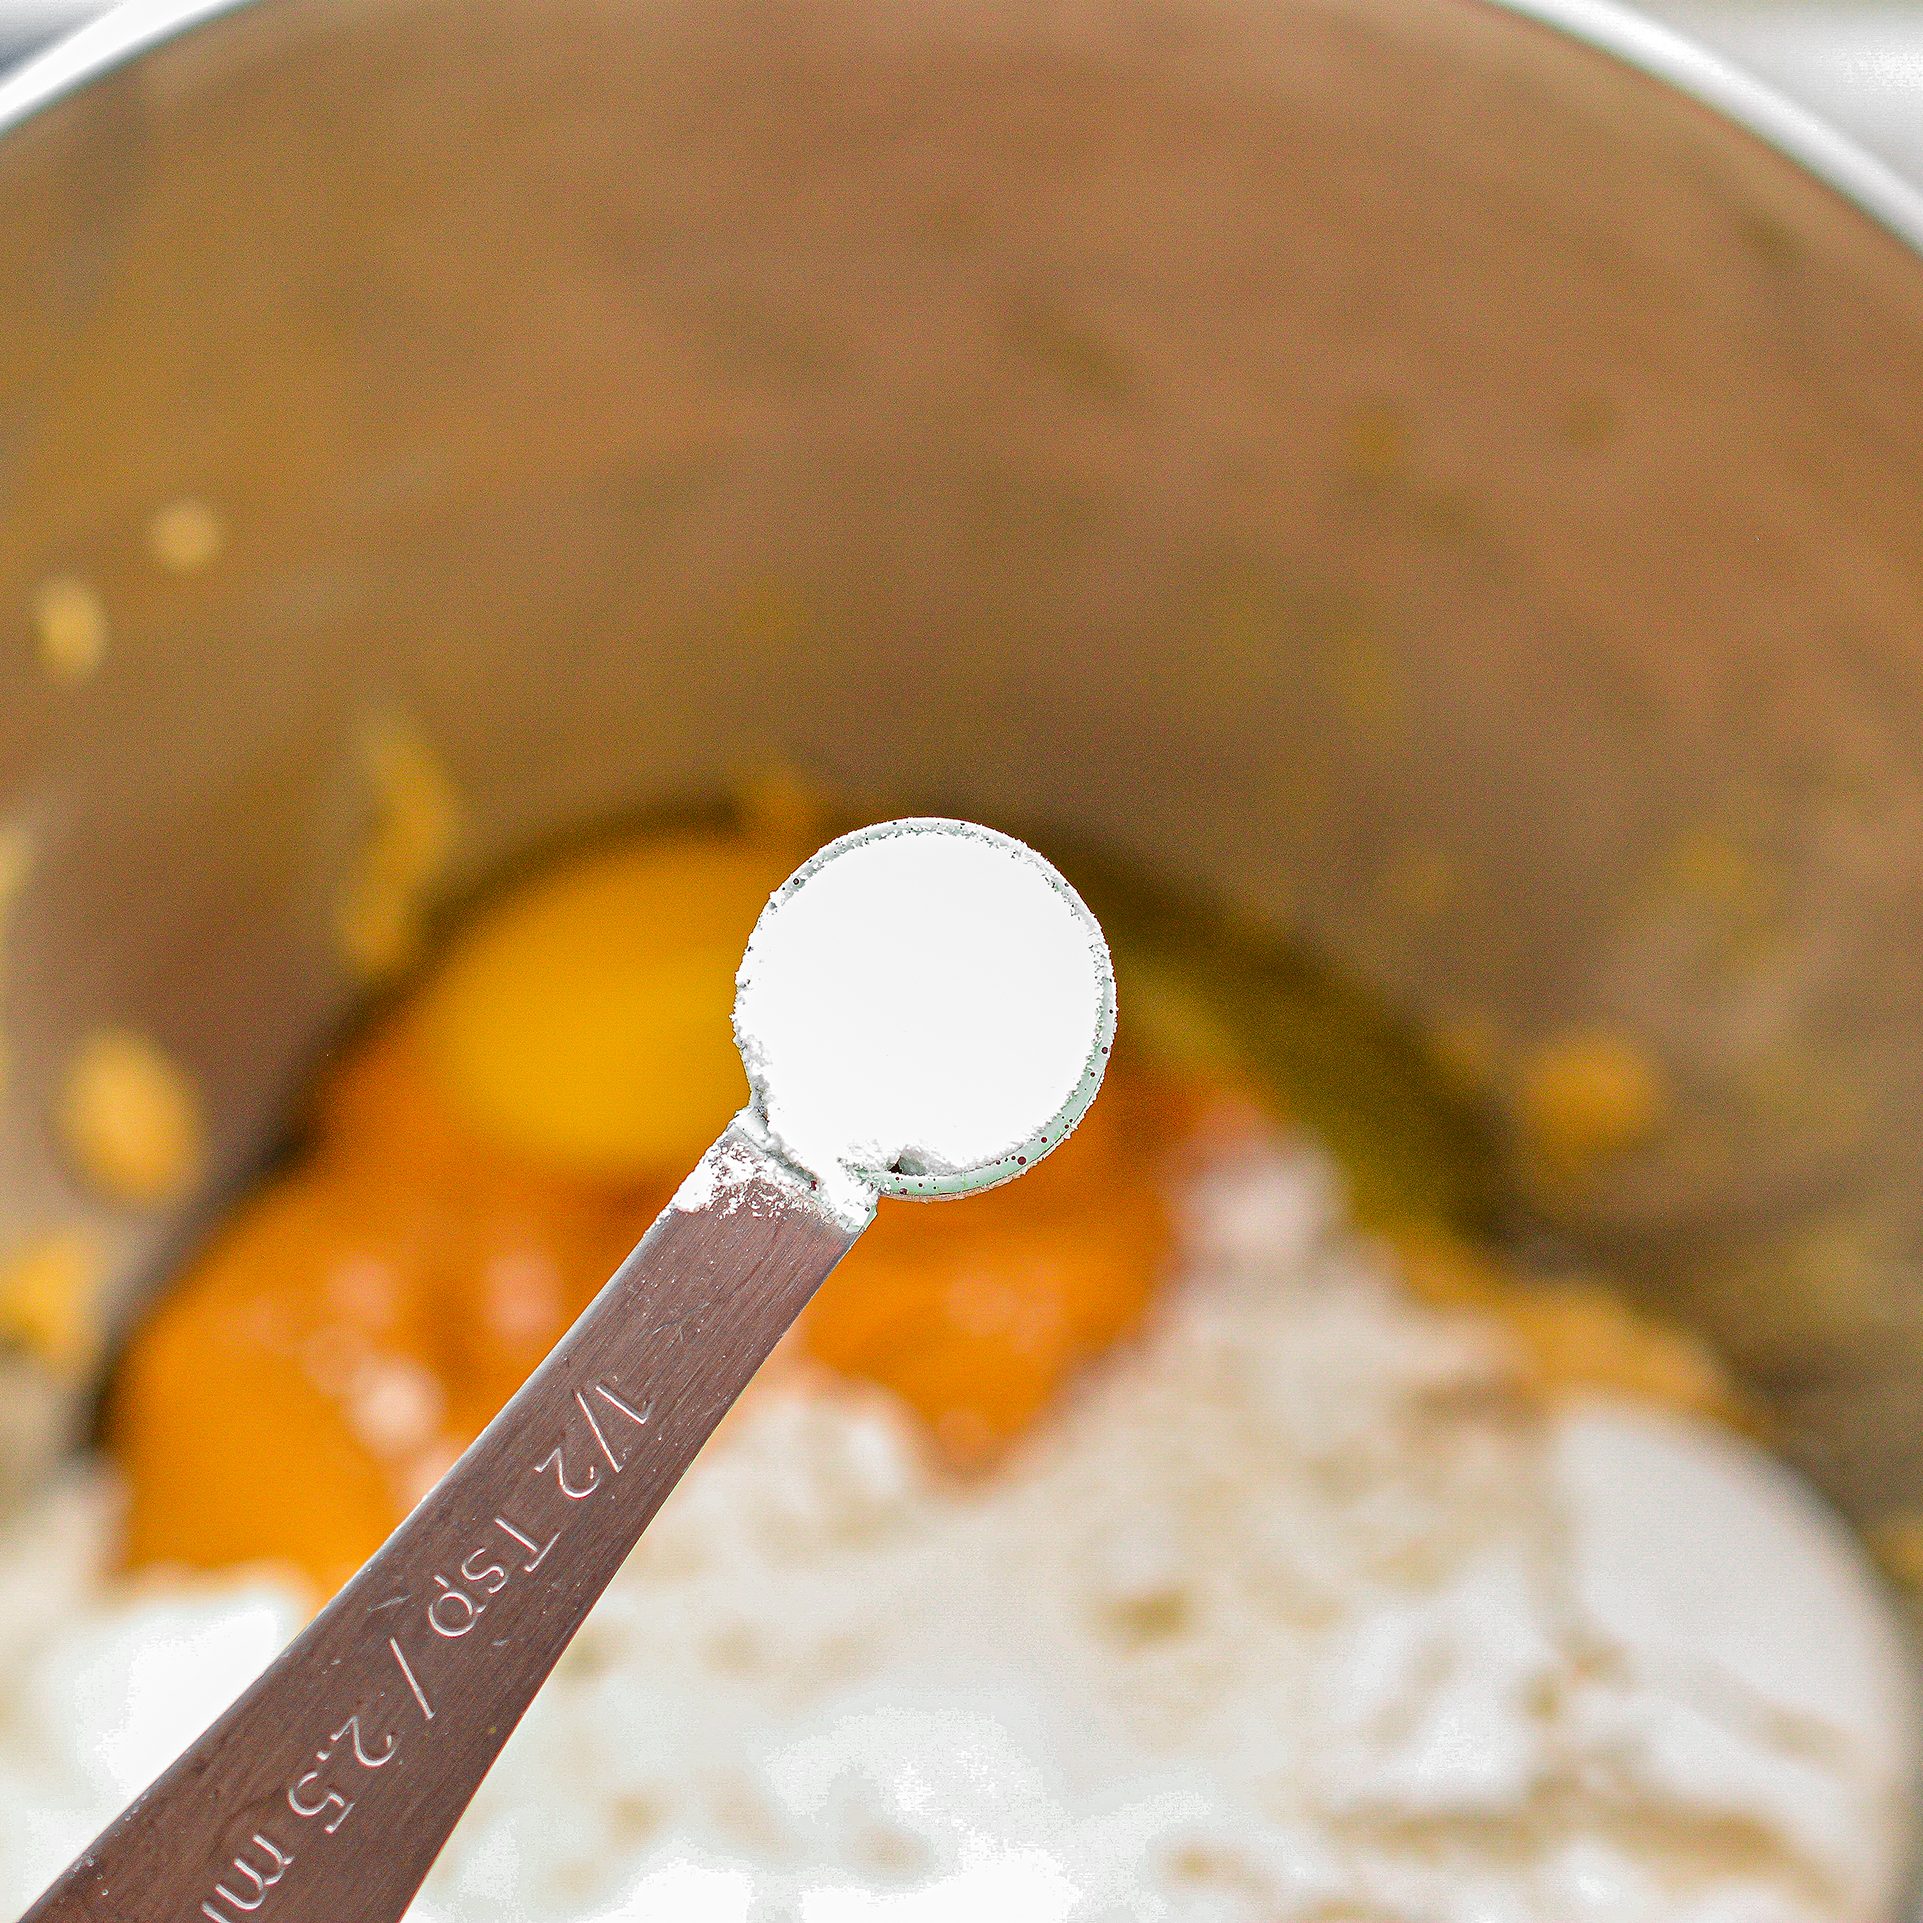 Mix in the peanut butter, egg, salt, baking soda and flour until a smooth batter forms.